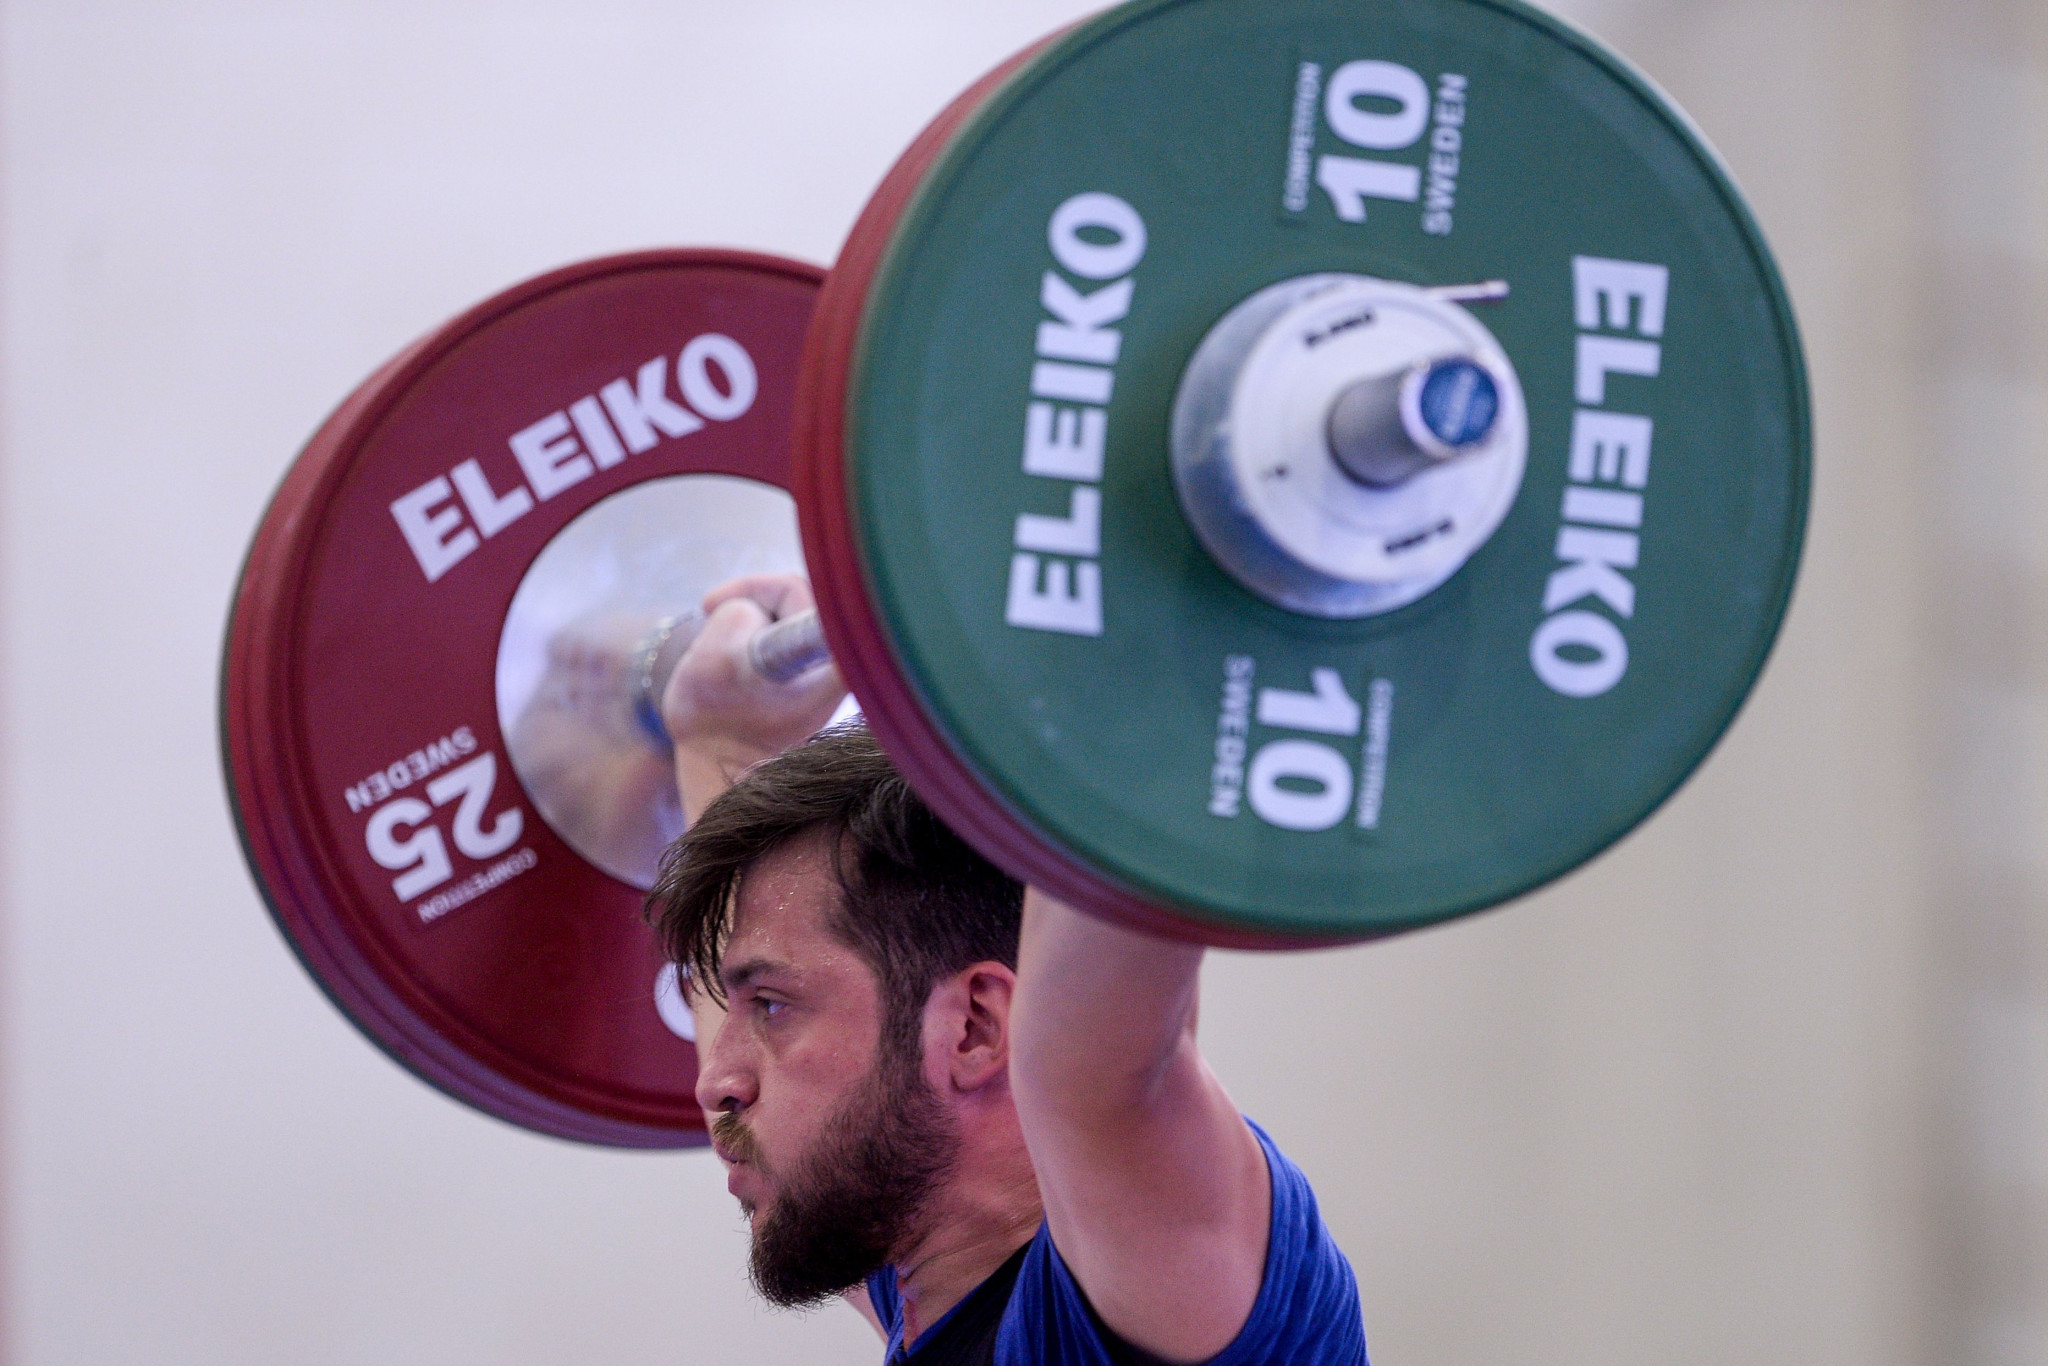 The International Weightlifting Federation Executive Board has today approved the 10 new bodyweight categories for both men and women ©Getty Images